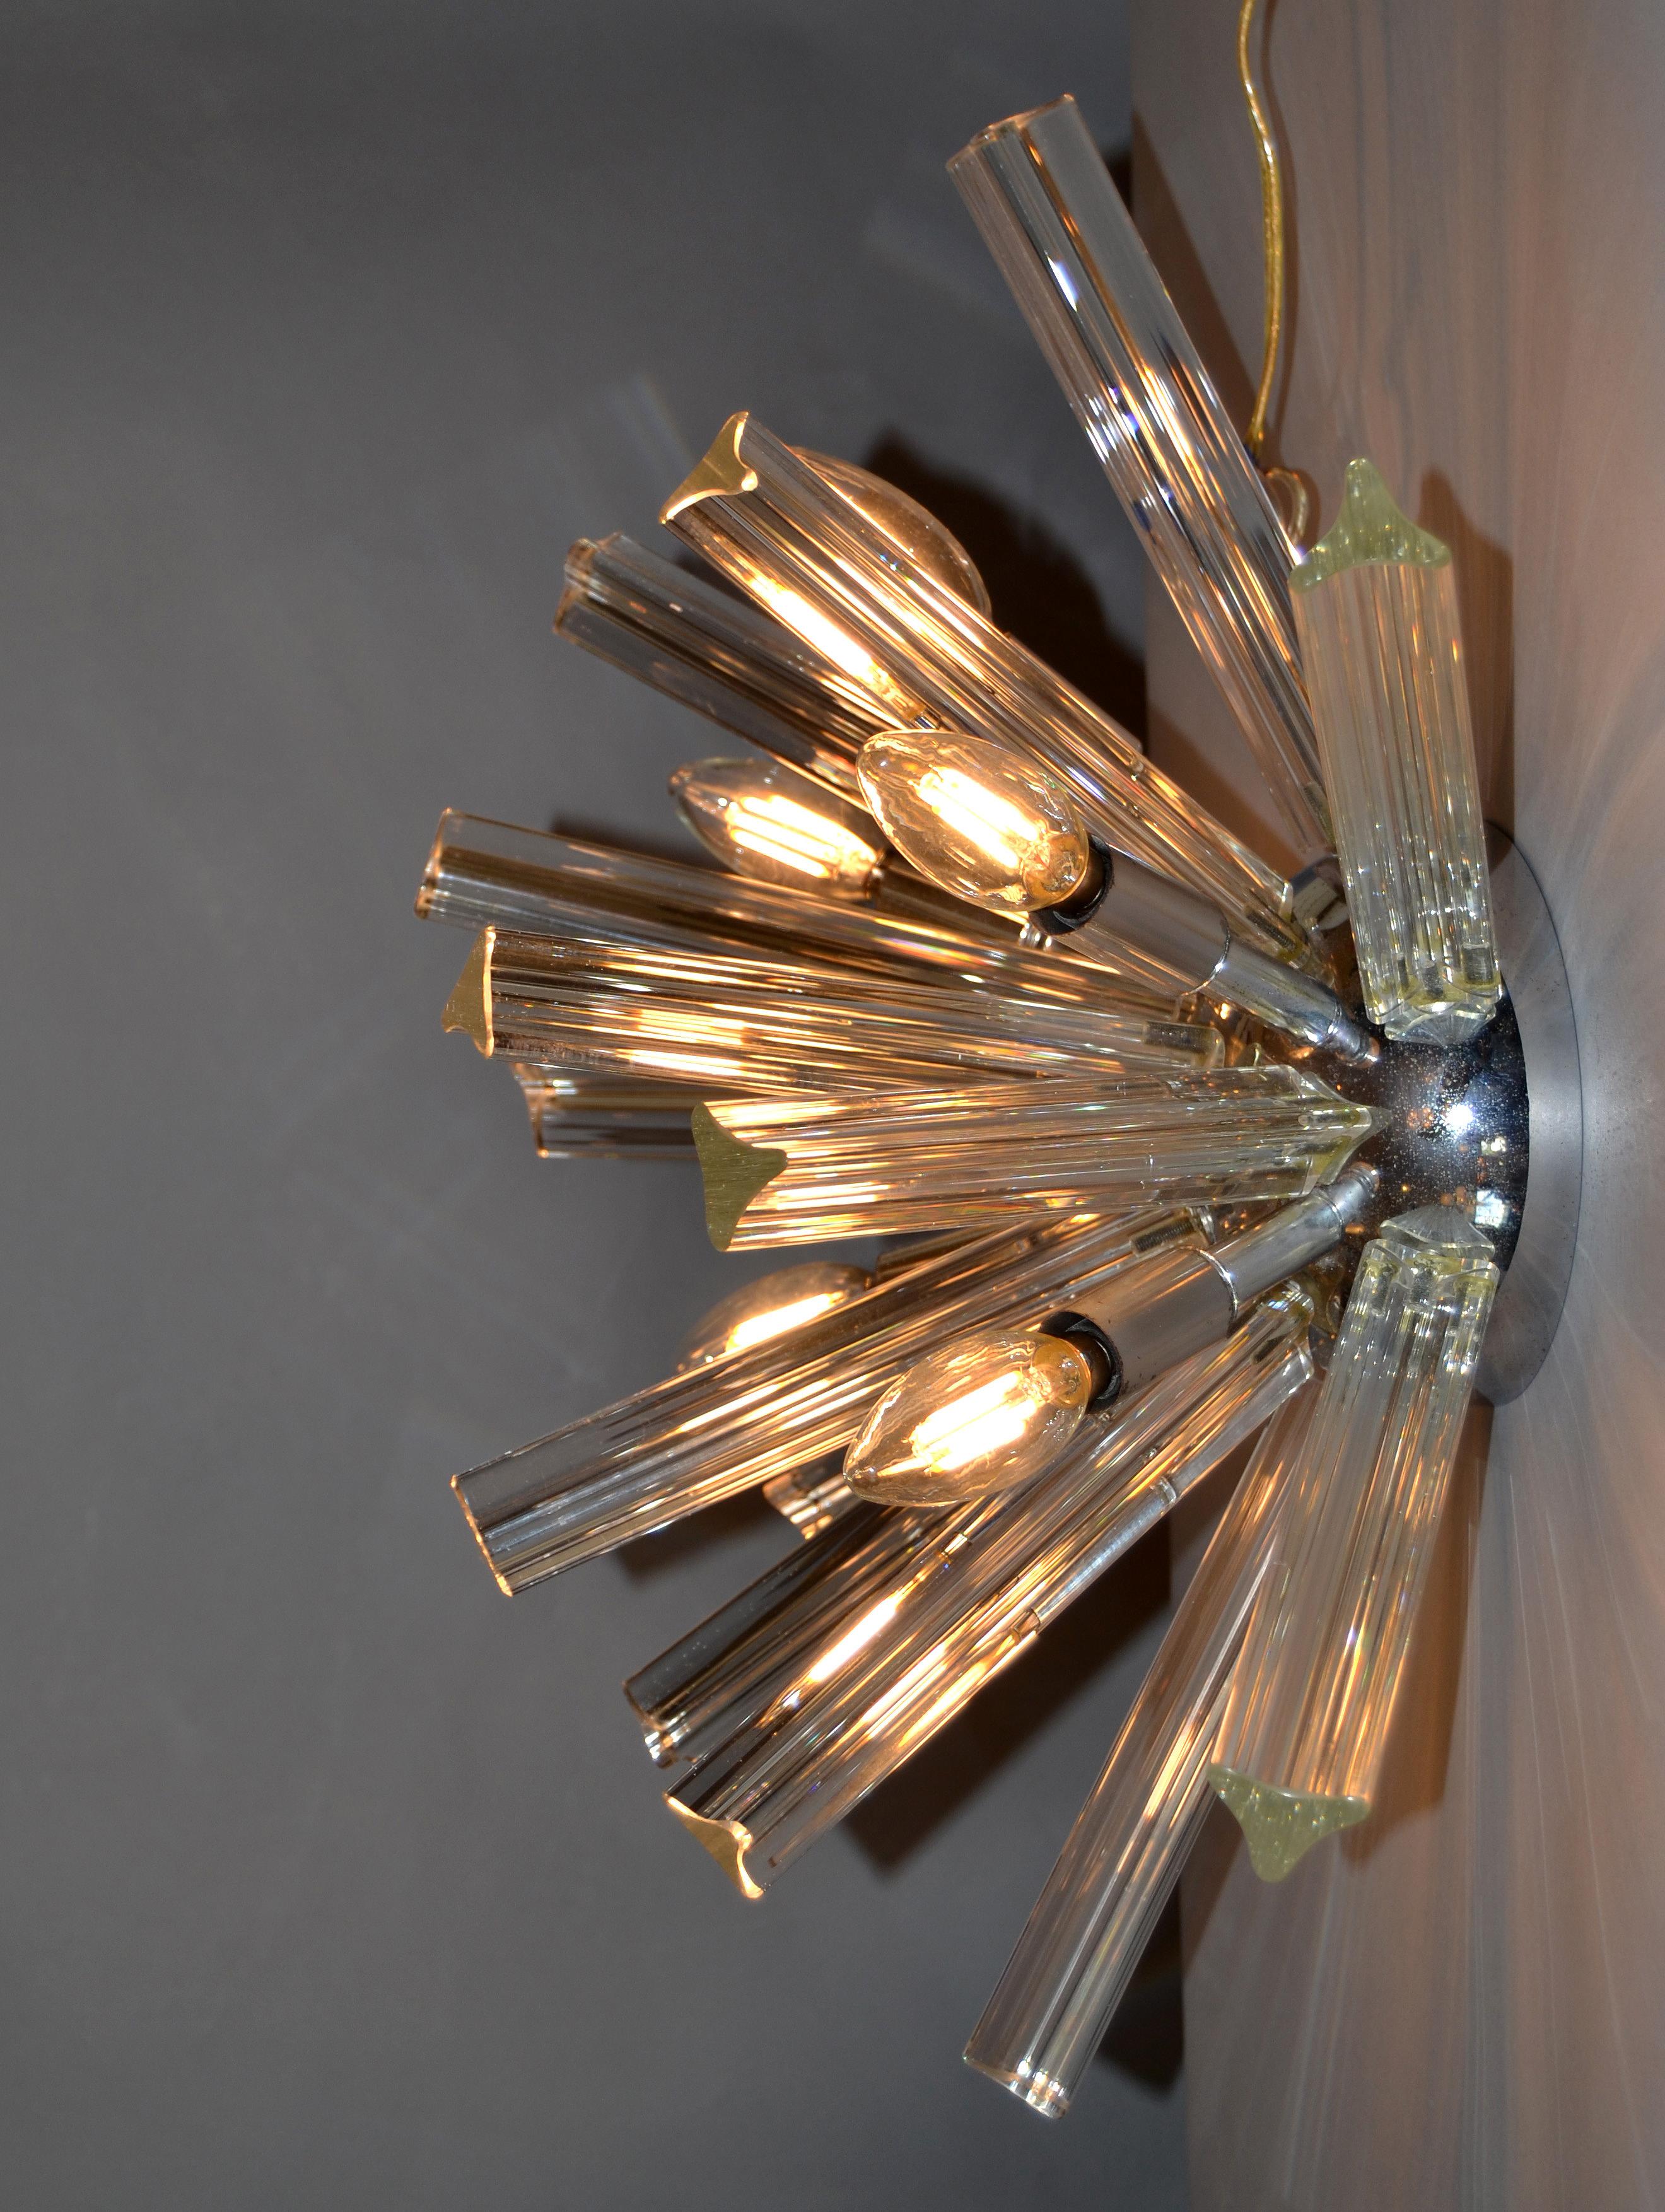 Mid-Century Modern chrome and crystal Sputnik light fixture.
Can be used as a ceiling light as well as a wall light fixture.
In perfect working condition and uses 6 max. 40 watts light bulbs, we are using LED lights.